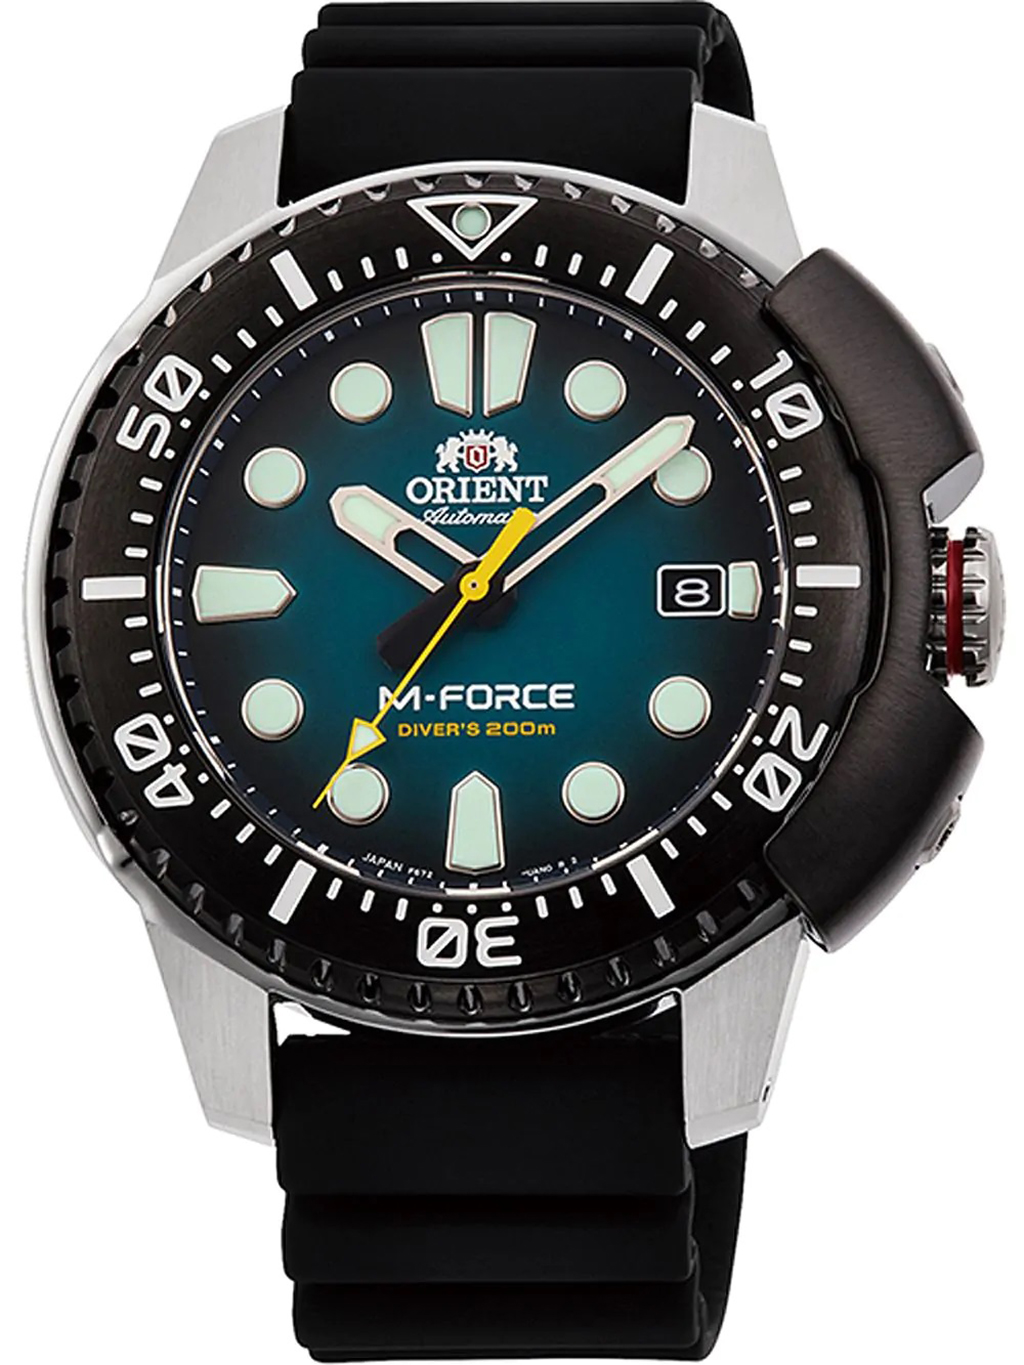 ORIENT M-Force Automatic Limited Edition lifestyle